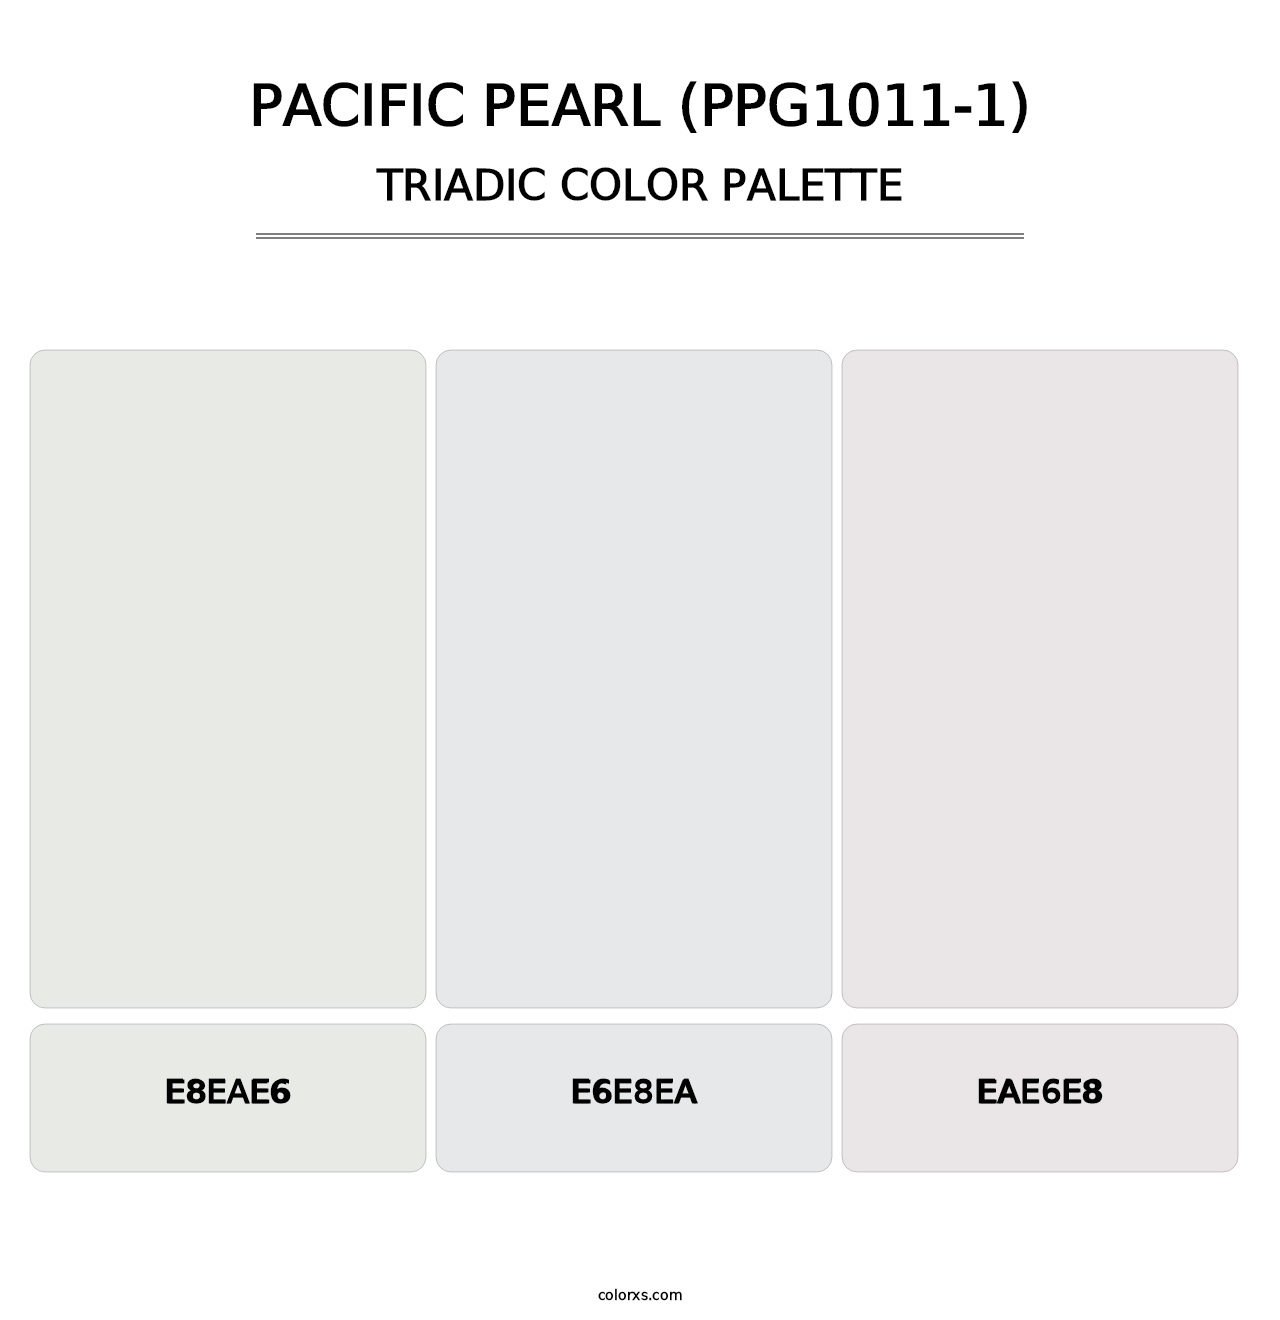 Pacific Pearl (PPG1011-1) - Triadic Color Palette